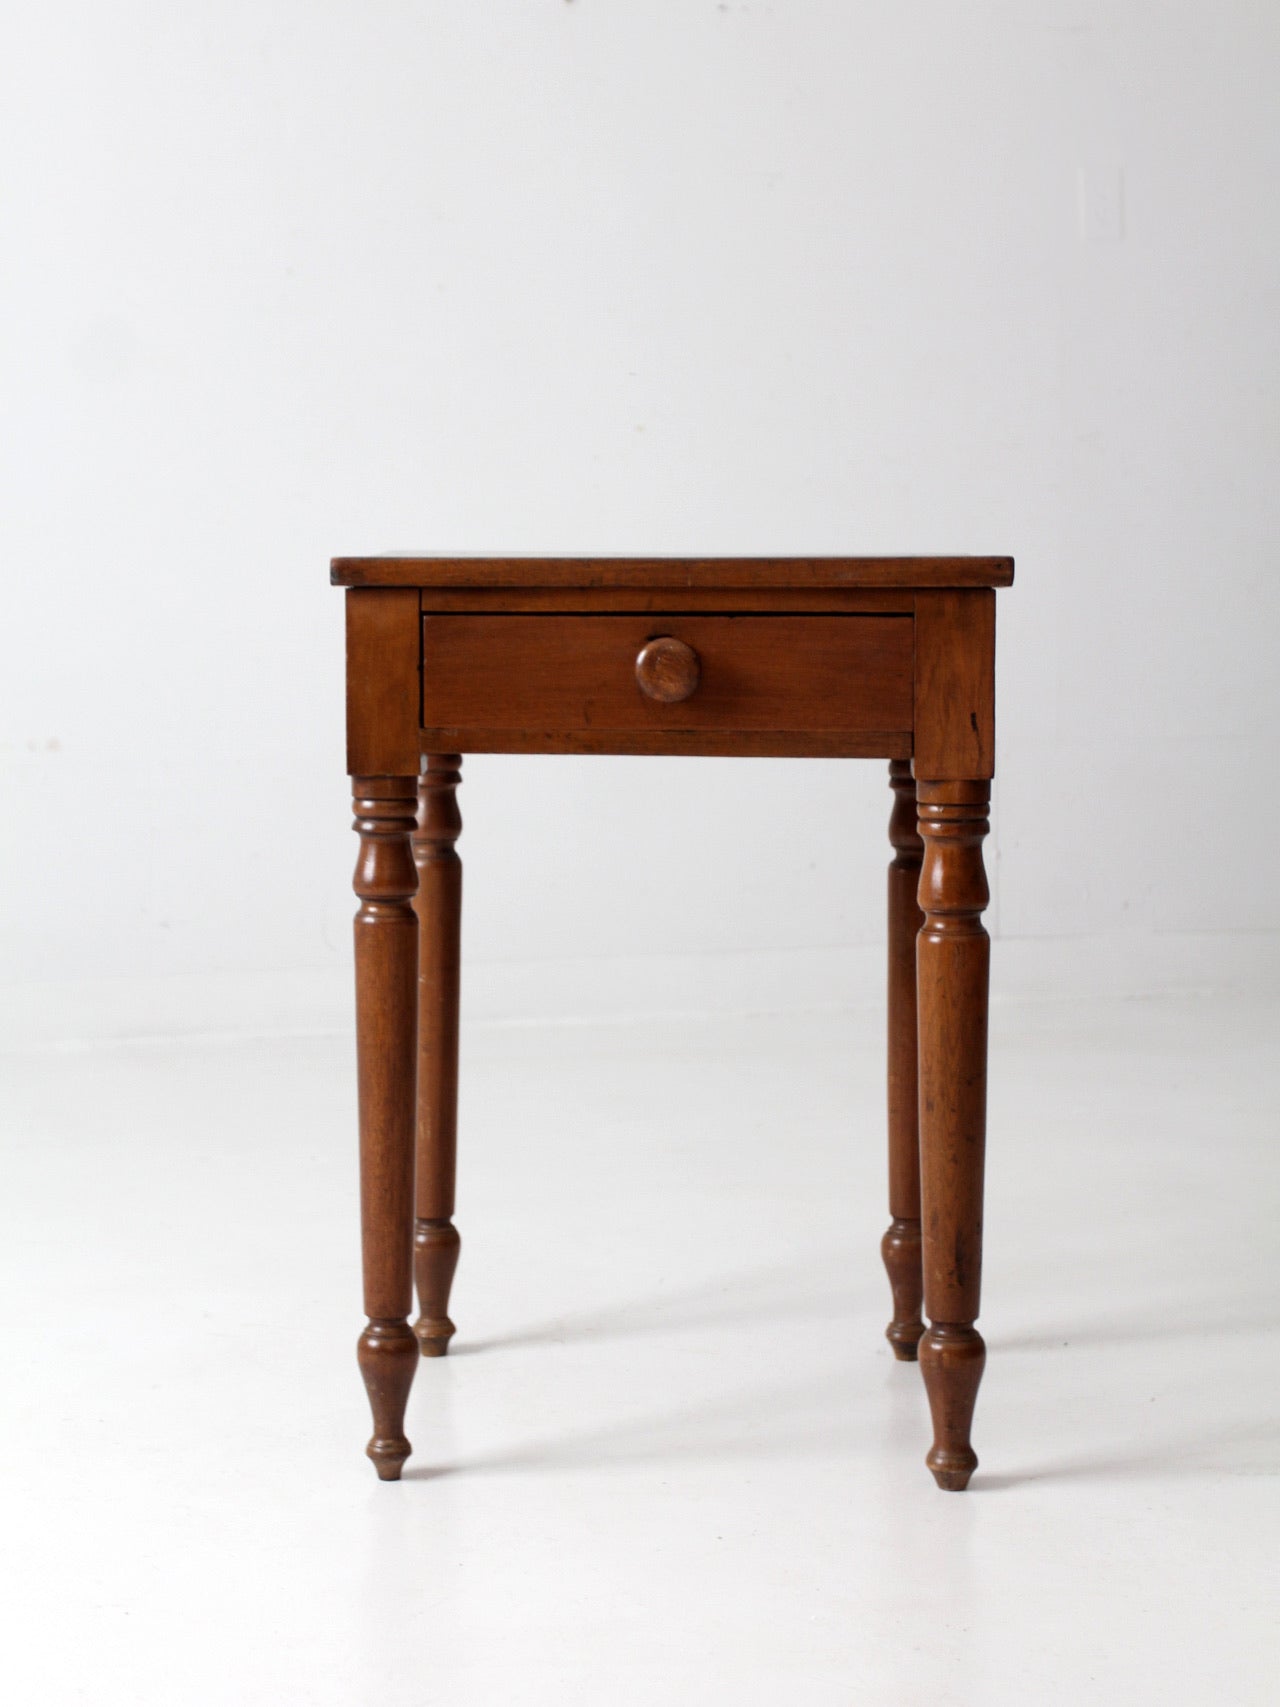 antique American Sheraton style side table